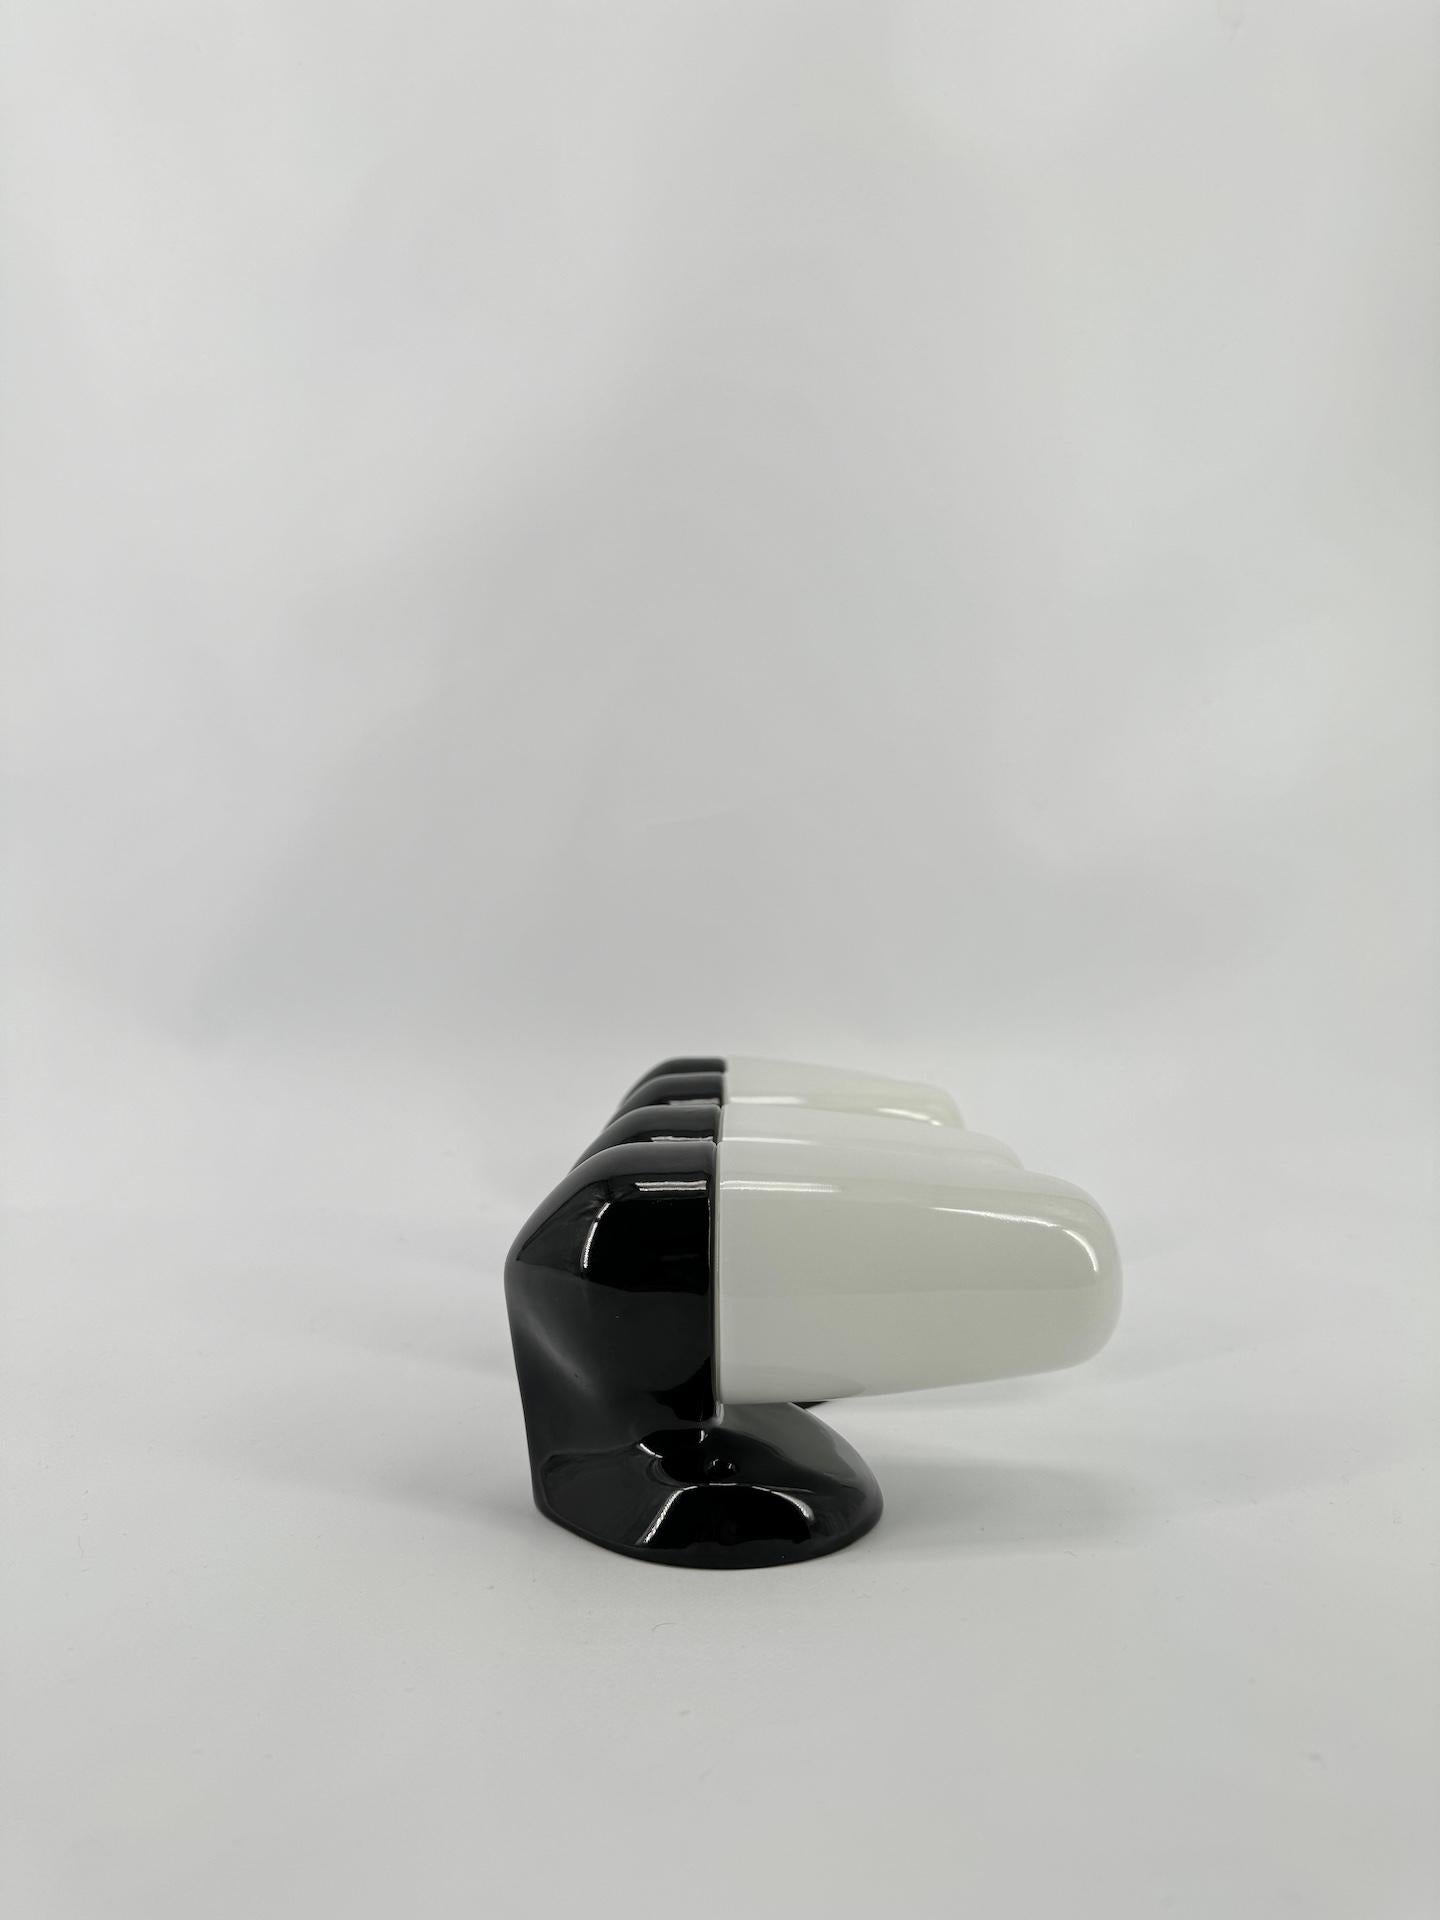 Ceramic Black Wall Lamp By Wilhelm Wagenfeld For Lindner 1950's  For Sale 8